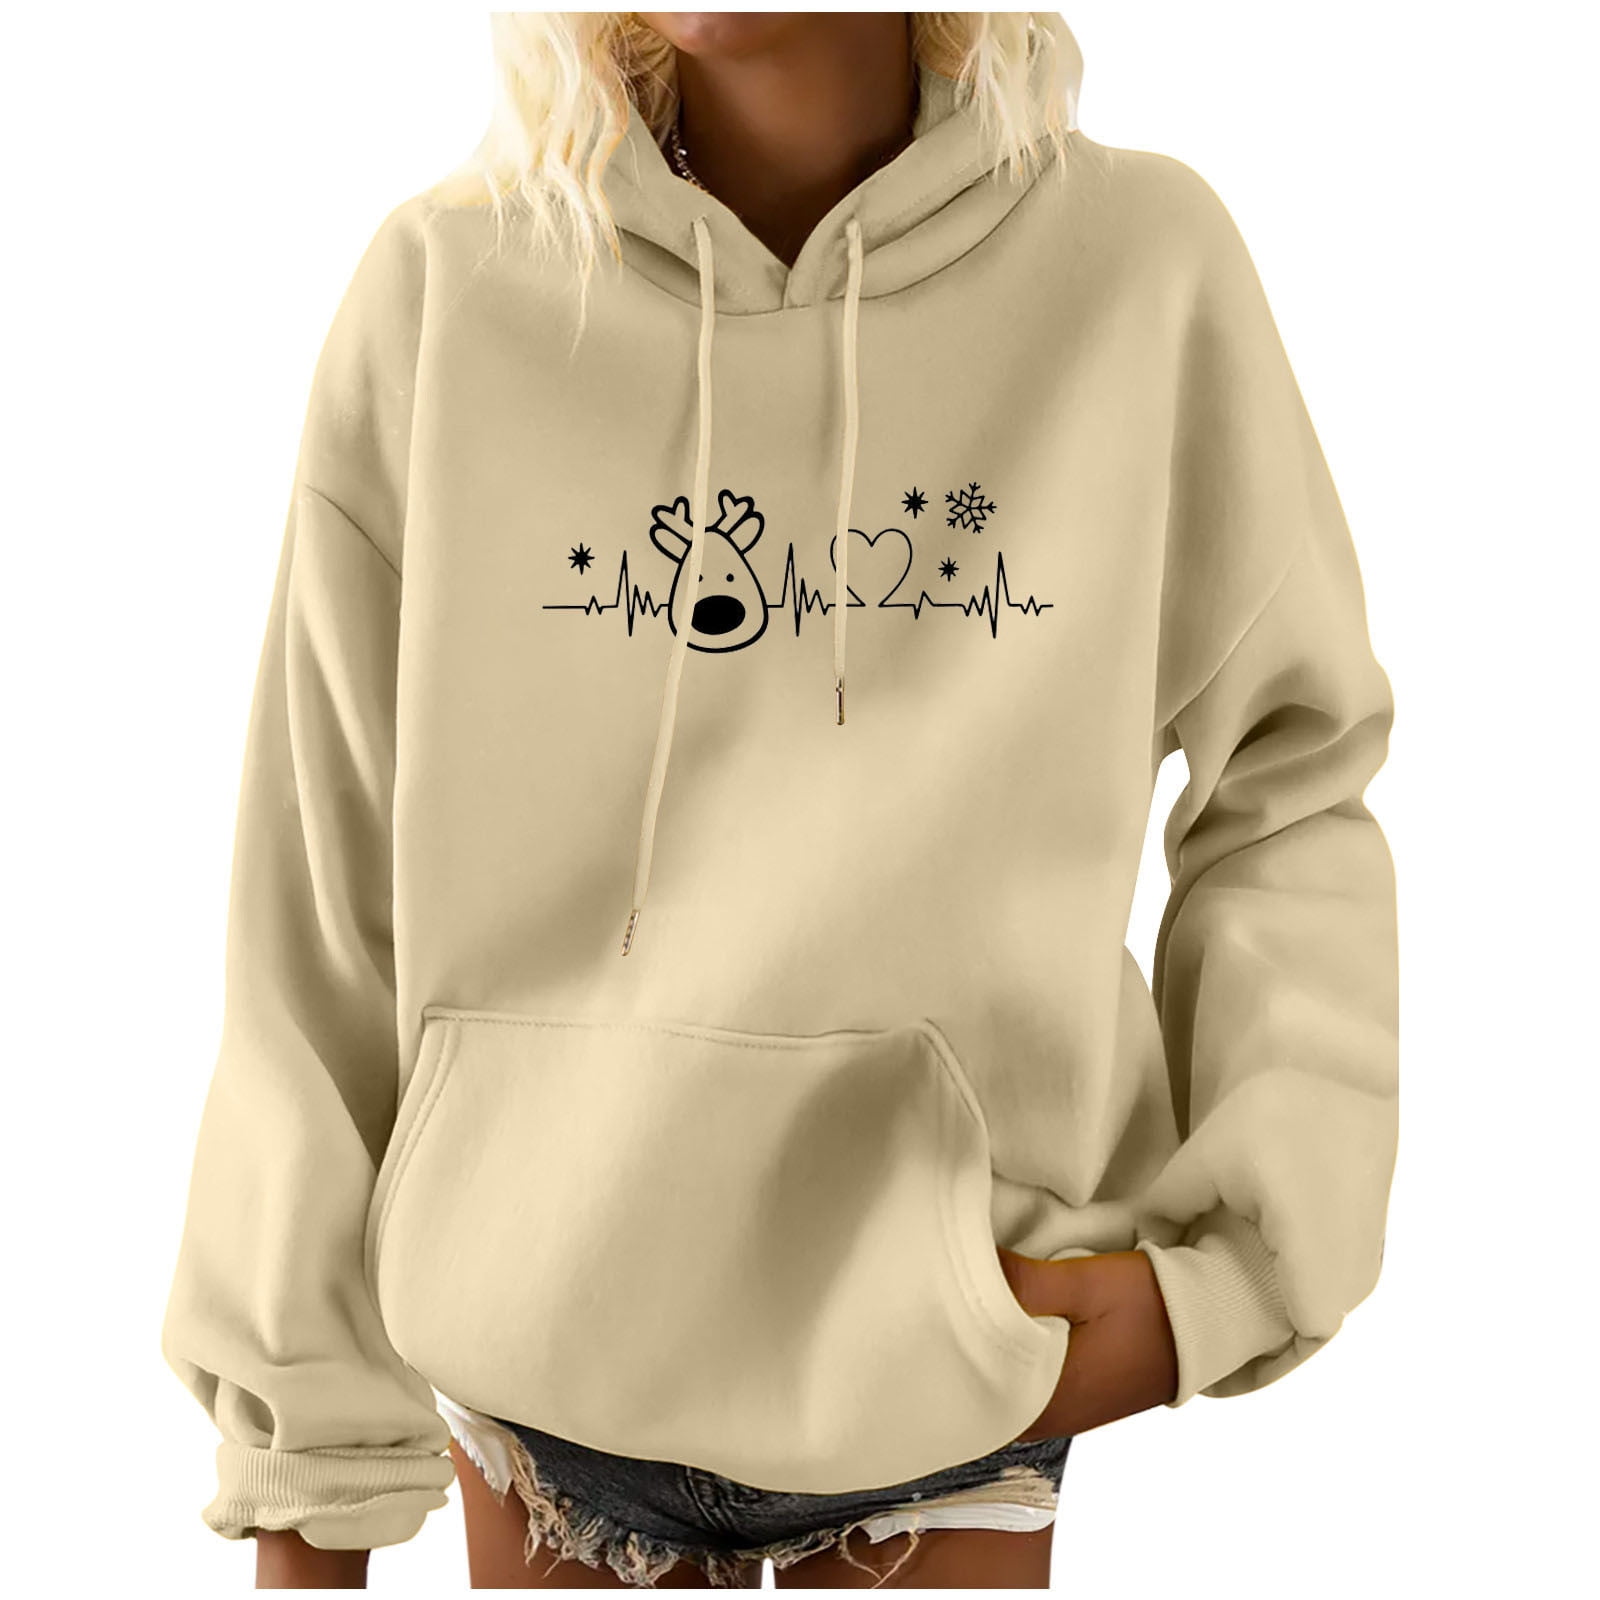 Ollysqiar Women Long Sleeve 3D Printed Lightweight Hoodies Drawstring  Sweatshirts,things for 1 dollar,overstock deals,my lists on my account my  wish list,next day delivery items